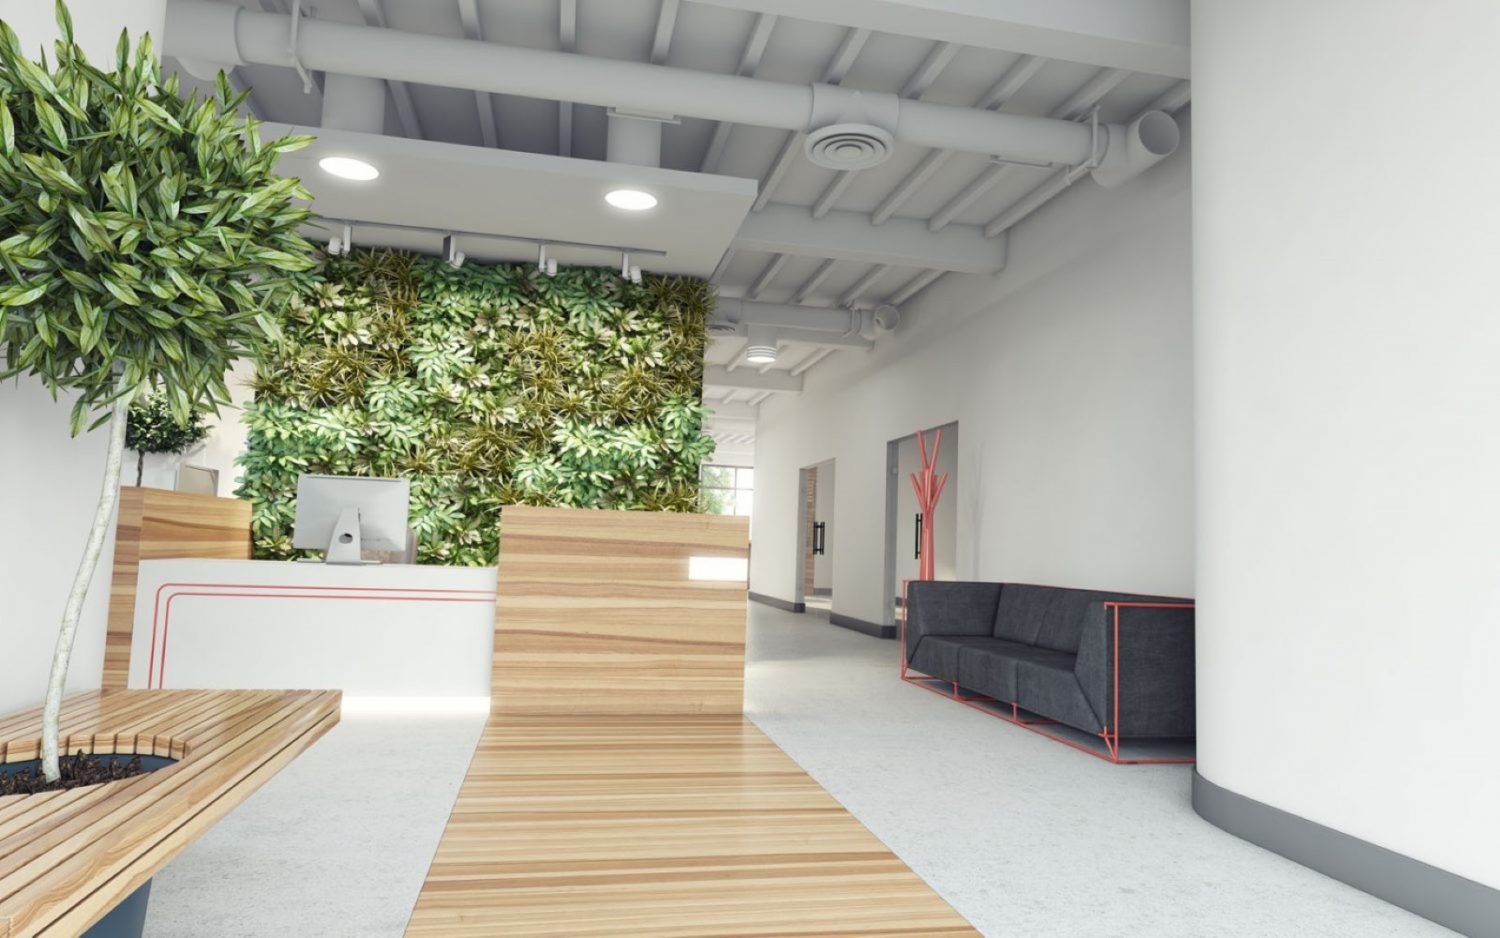 wall covered in leafs for eco friendly office design 1500x938